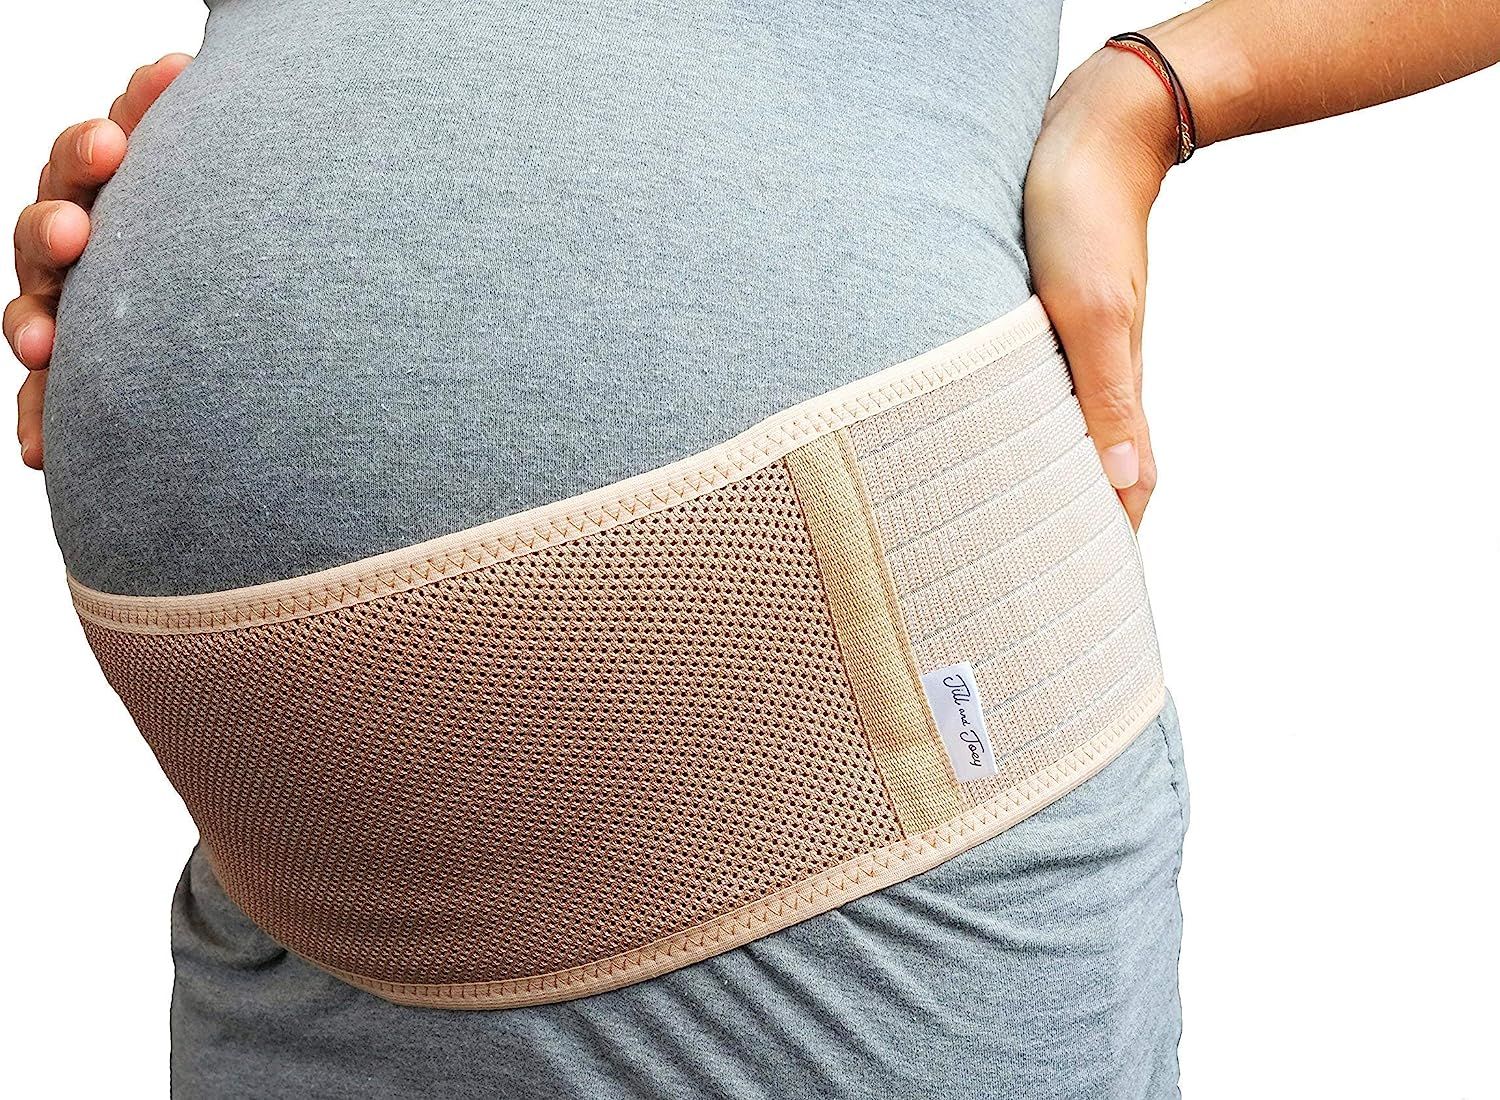 Jill & Joey Maternity Belt - Belly Band for Pregnancy Back Support - Breathable | Amazon (US)